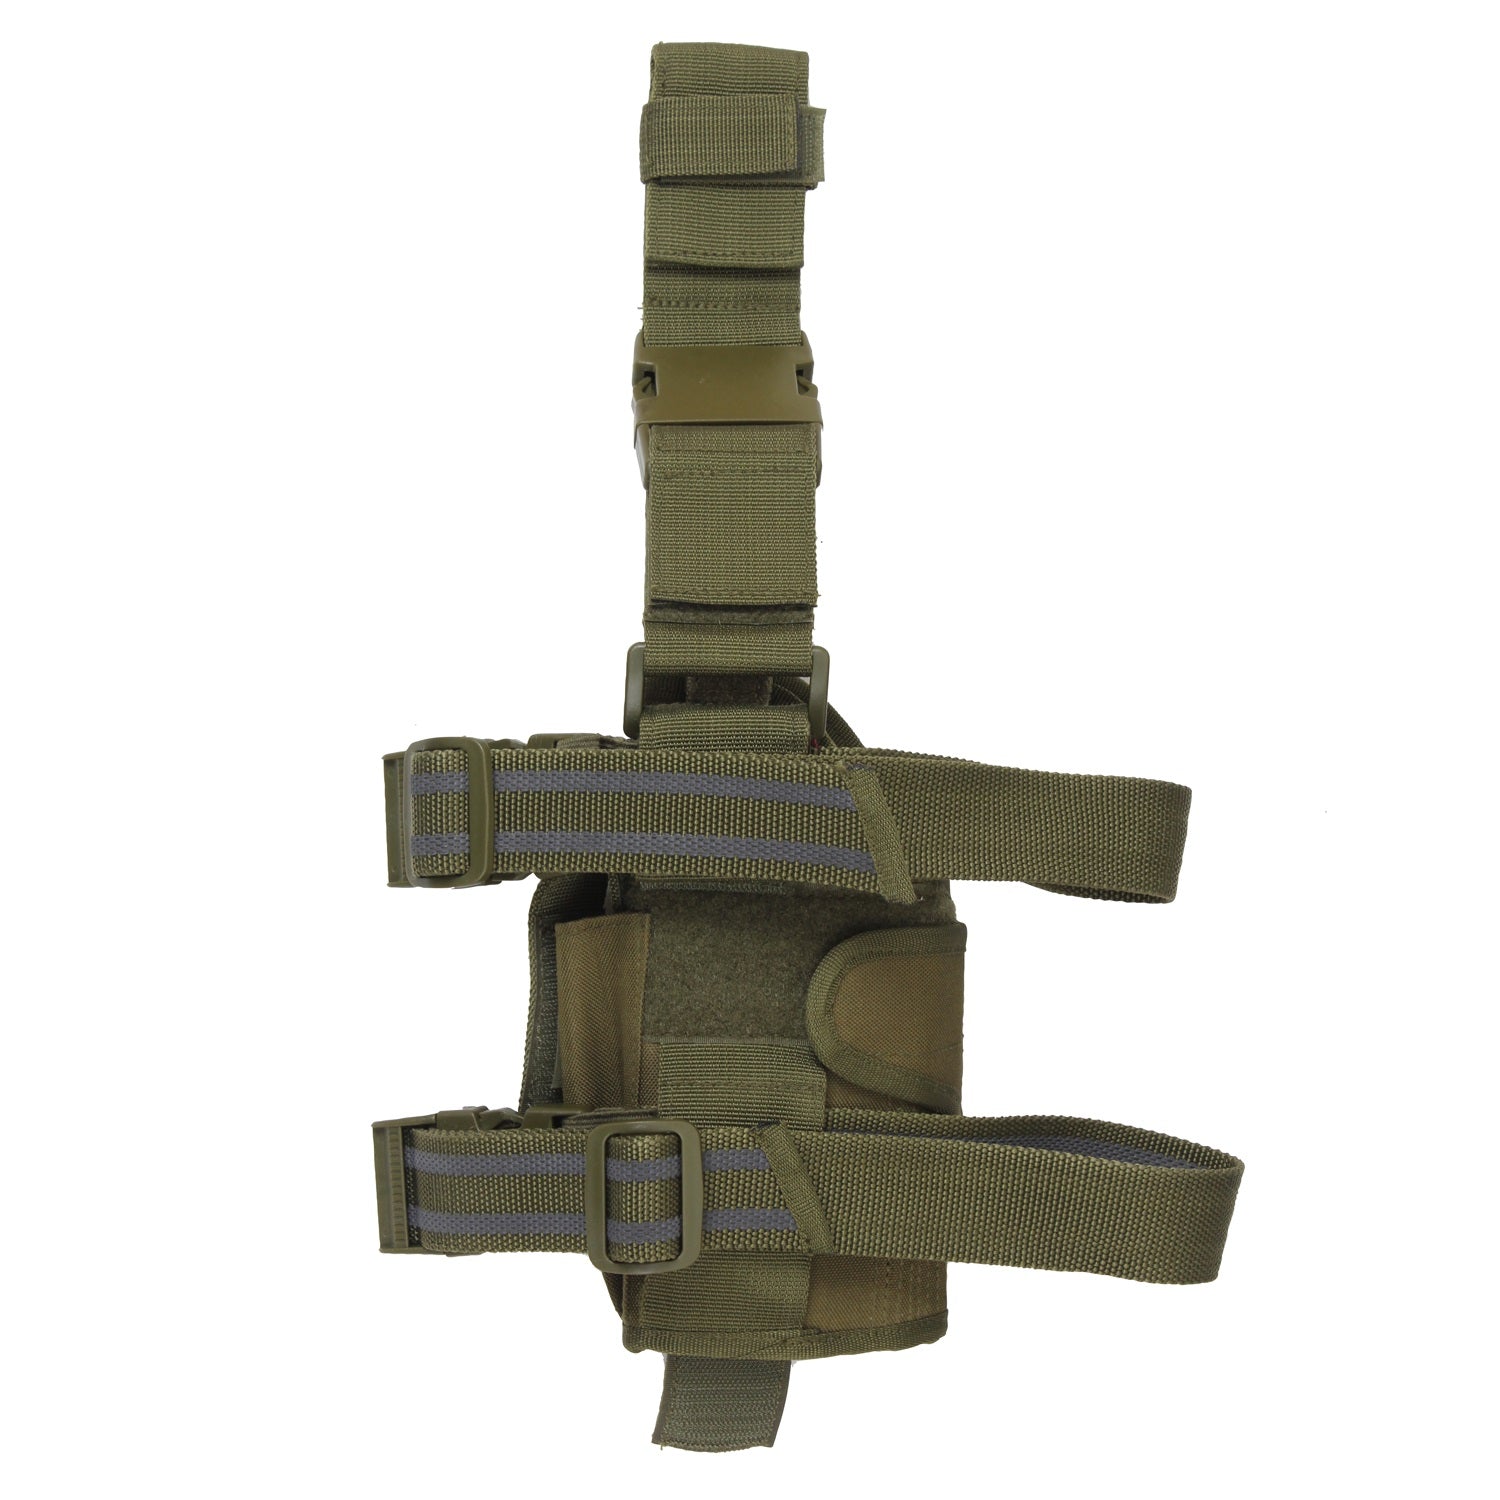 Rothco Deluxe Adjustable Drop Leg Tactical Holster Olive Drab